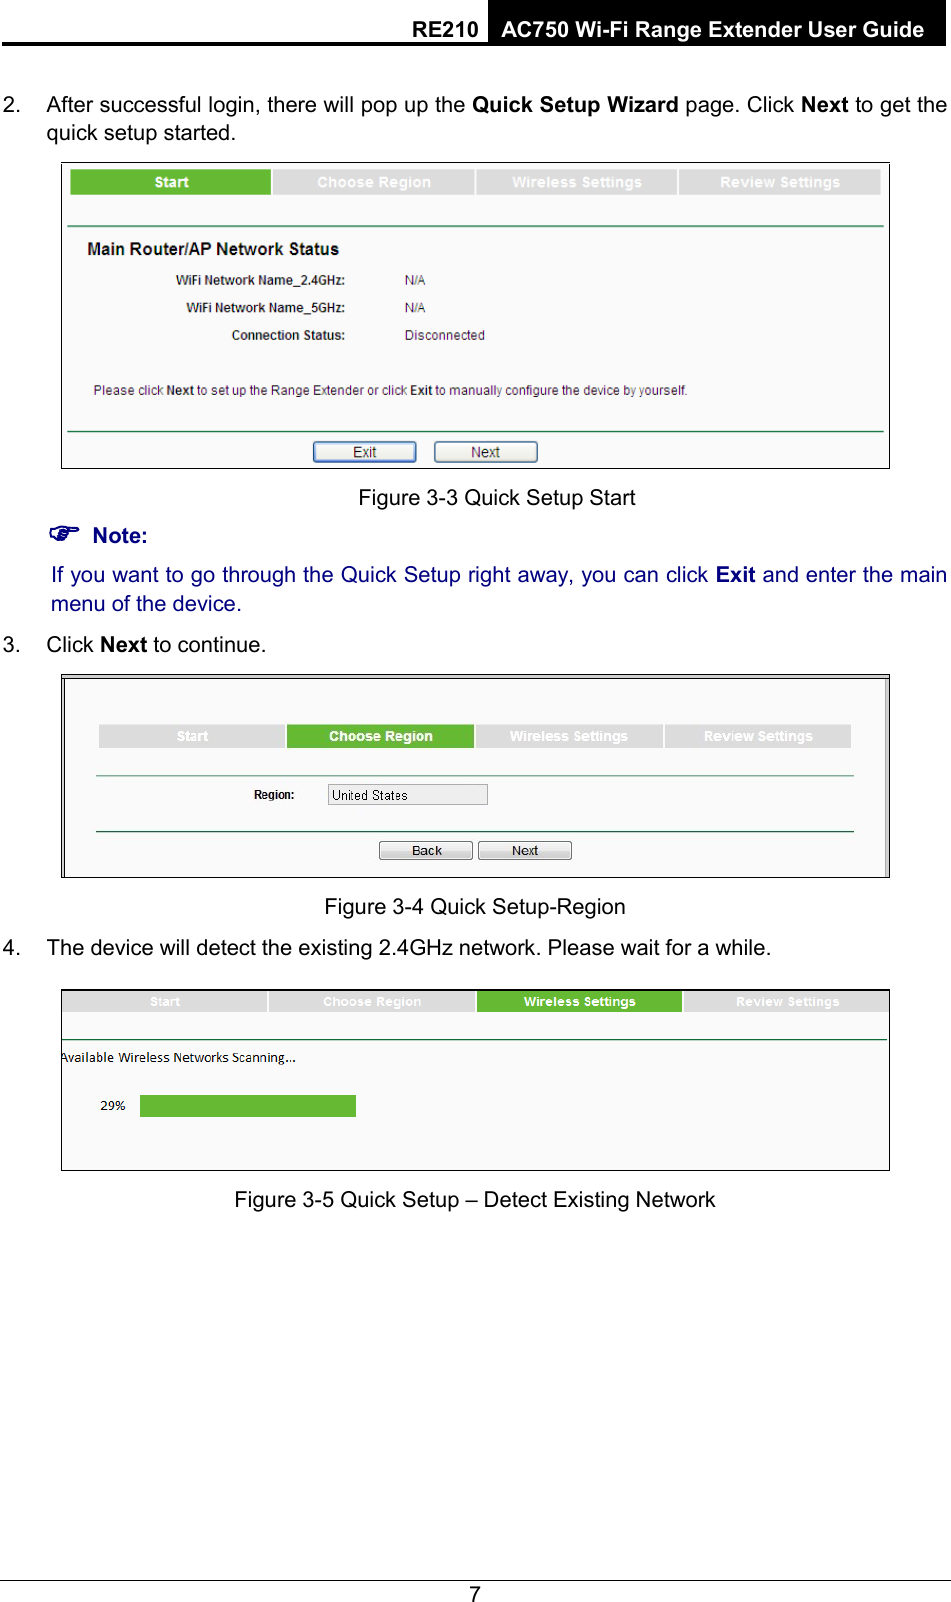 RE210 AC750 Wi-Fi Range Extender User Guide  2. After successful login, there will pop up the Quick Setup Wizard page. Click Next to get the quick setup started.  Figure 3-3 Quick Setup Start  Note: If you want to go through the Quick Setup right away, you can click Exit and enter the main menu of the device. 3.  Click Next to continue.  Figure 3-4 Quick Setup-Region 4. The device will detect the existing 2.4GHz network. Please wait for a while.  Figure 3-5 Quick Setup – Detect Existing Network 7 